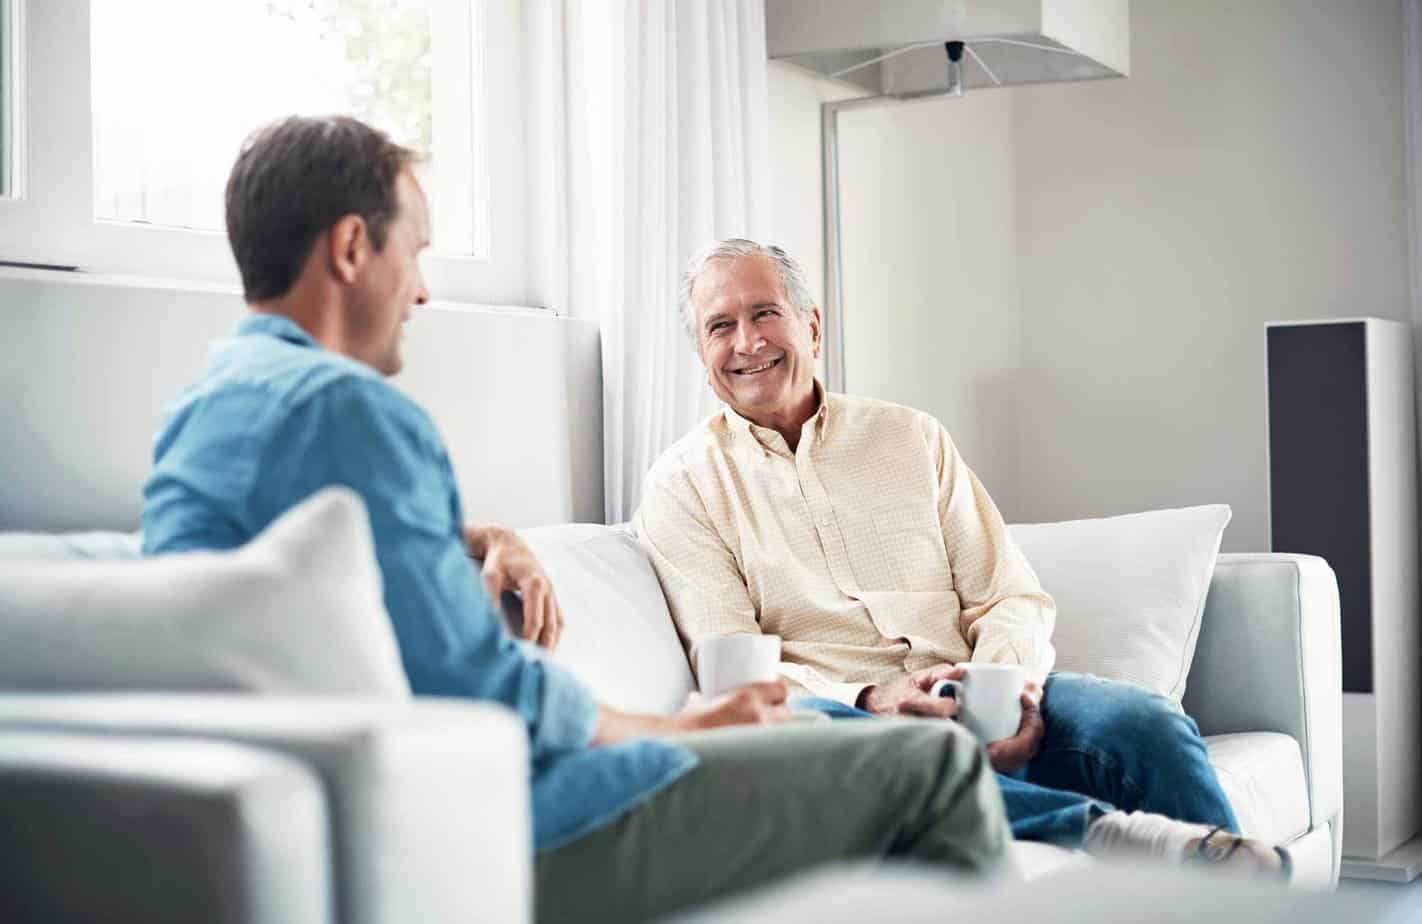 father and son having important conversation on couch in living room